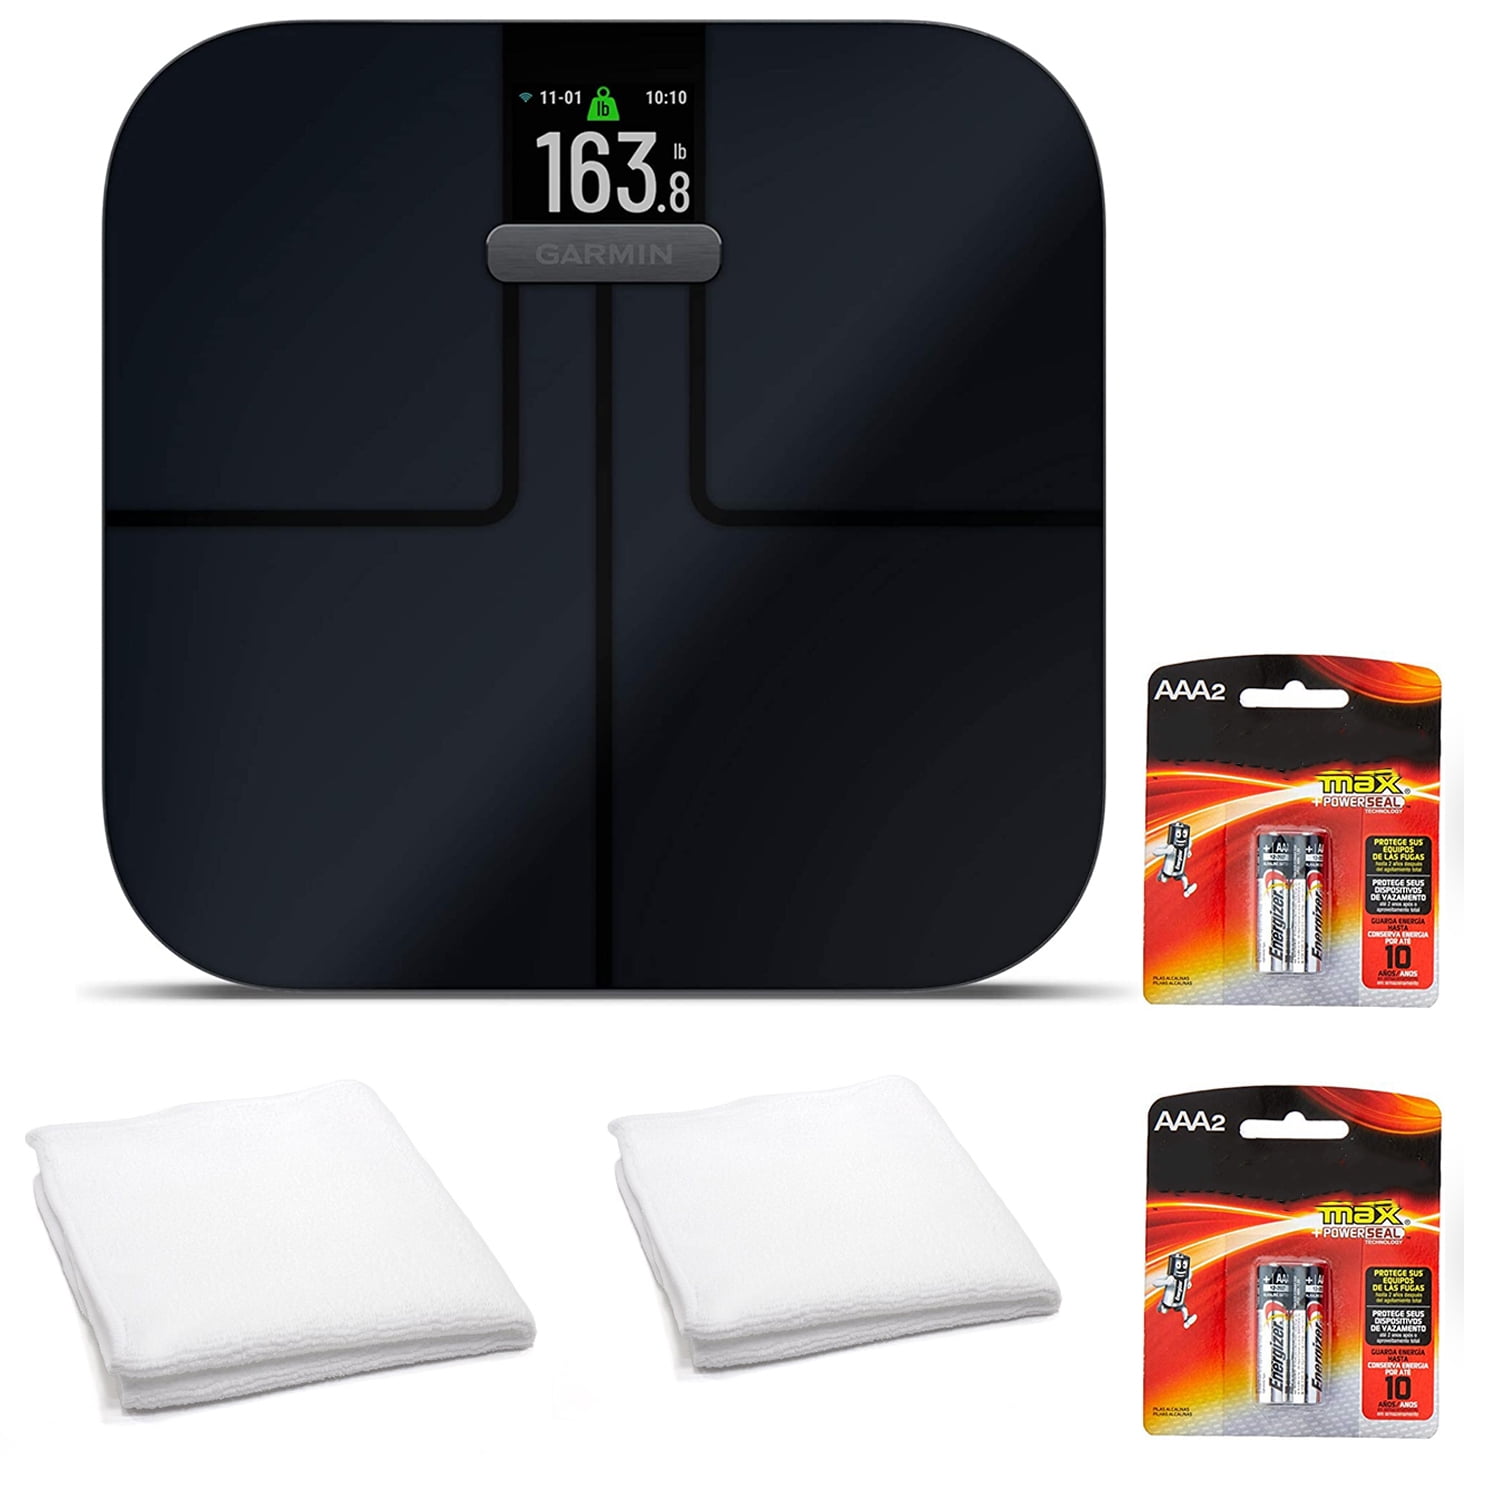  Garmin Index S2, Smart Scale with Wireless Connectivity,  Measure Body Fat, Muscle, Bone Mass, Body Water% and More, White  (010-02294-03) : Health & Household